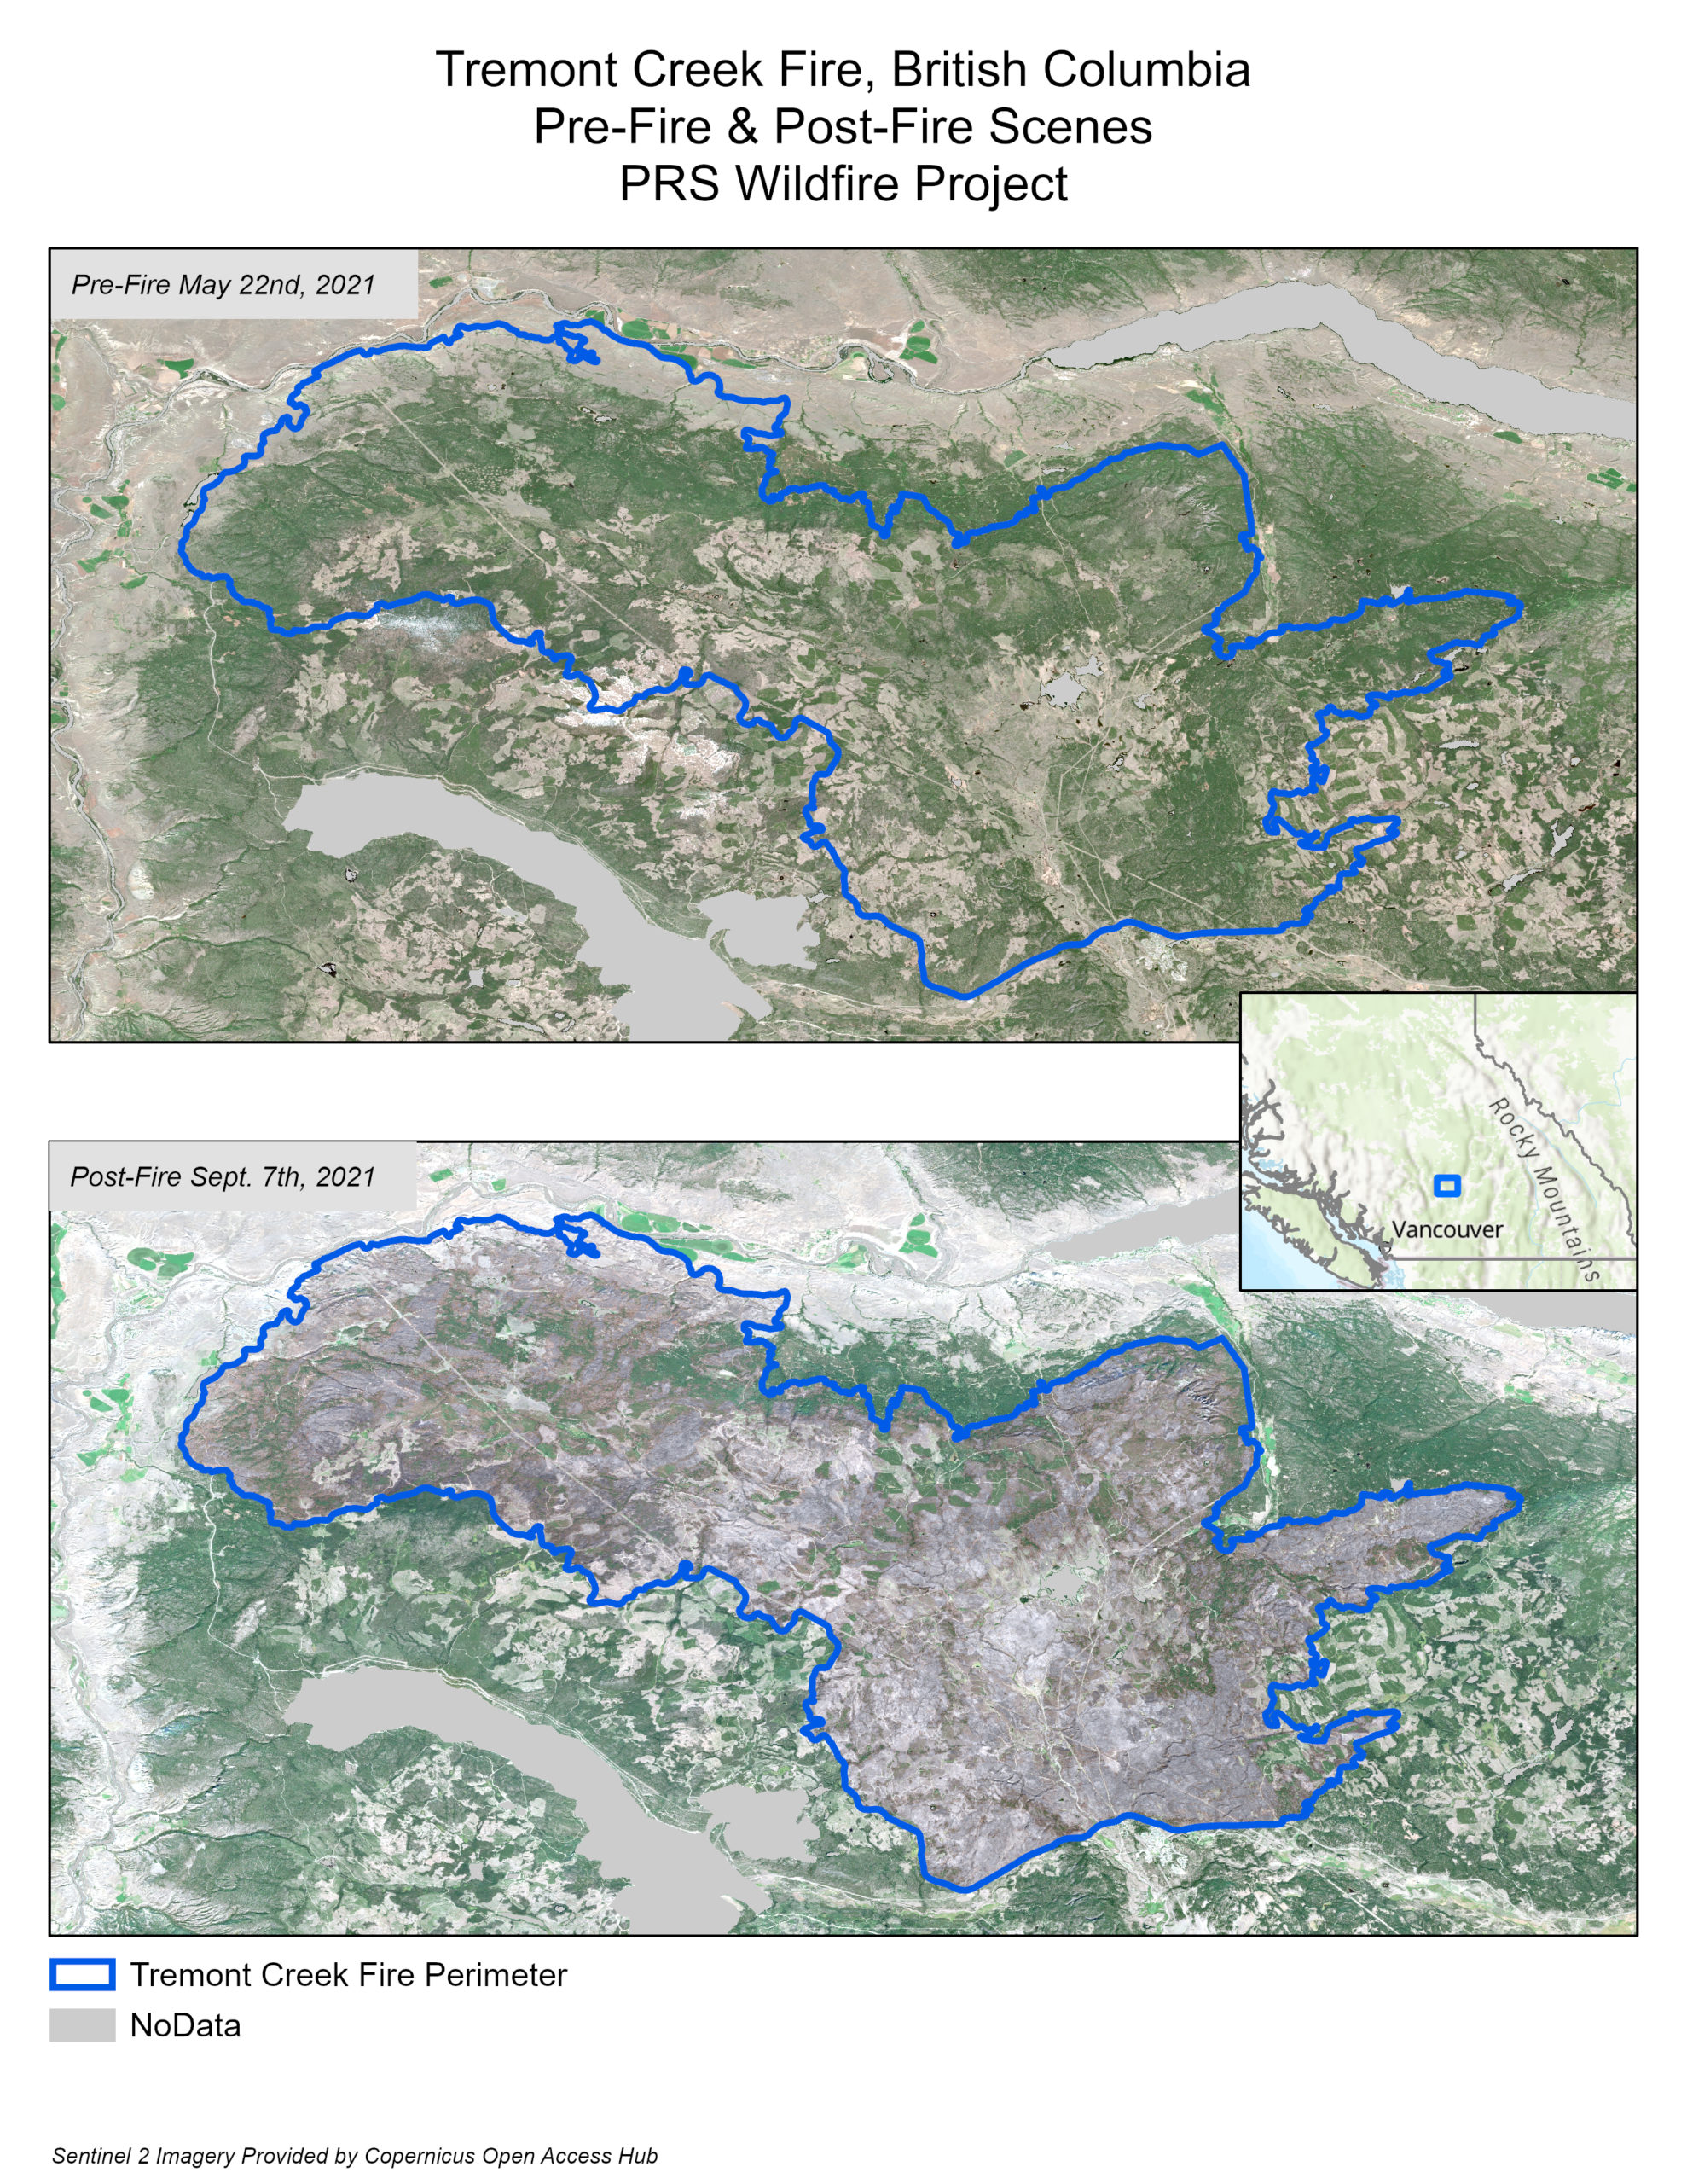 Pre and post-fire images from the the Tremont Creek Fire in BC in 2021